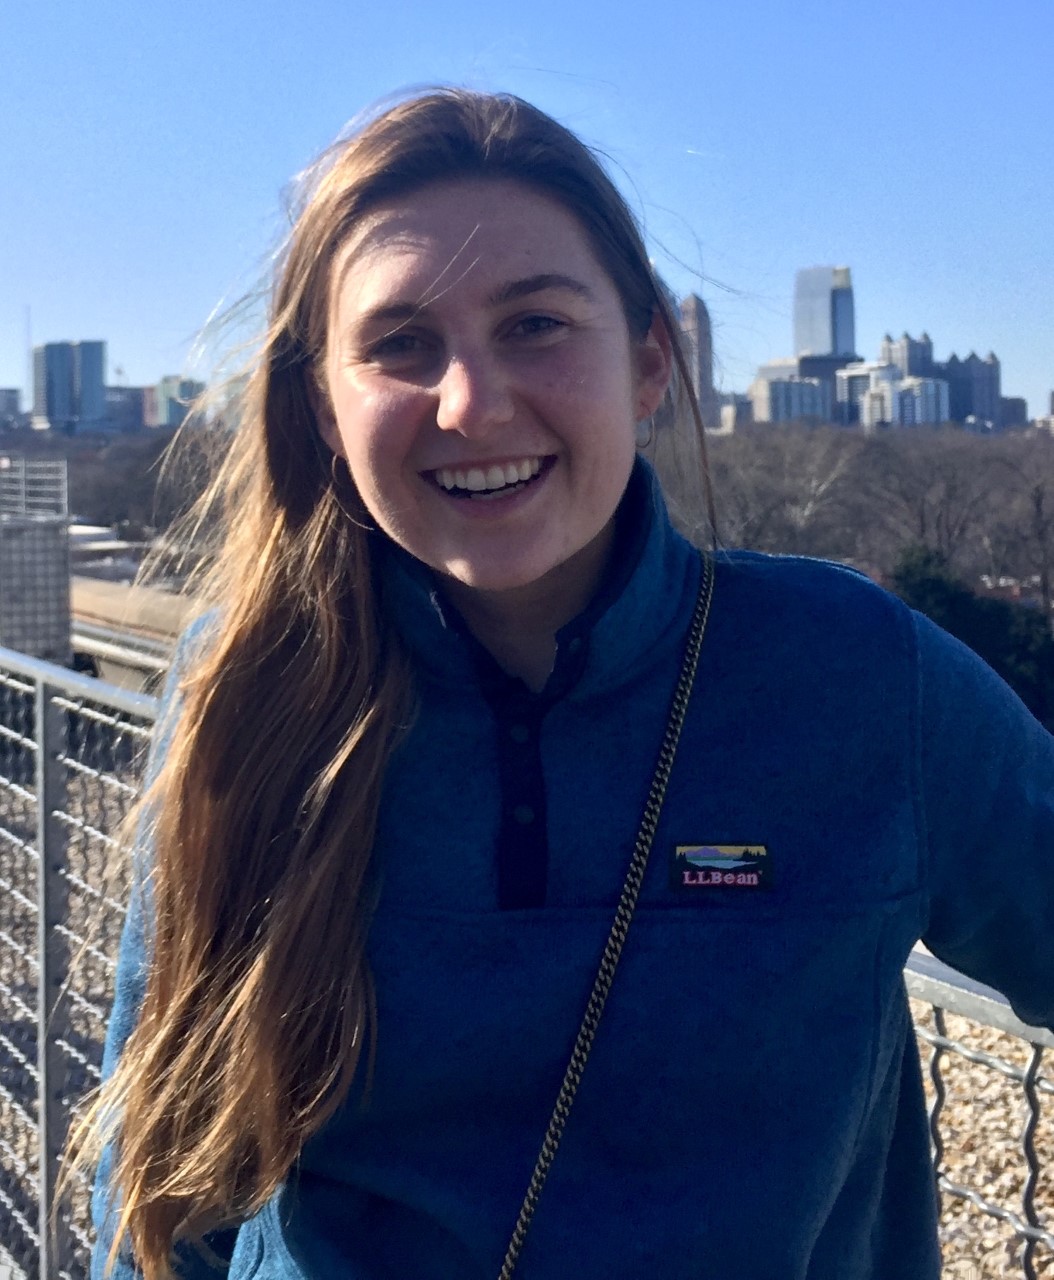 Claire Elbon is a Ph.D. student studying Ocean Science & Engineering.